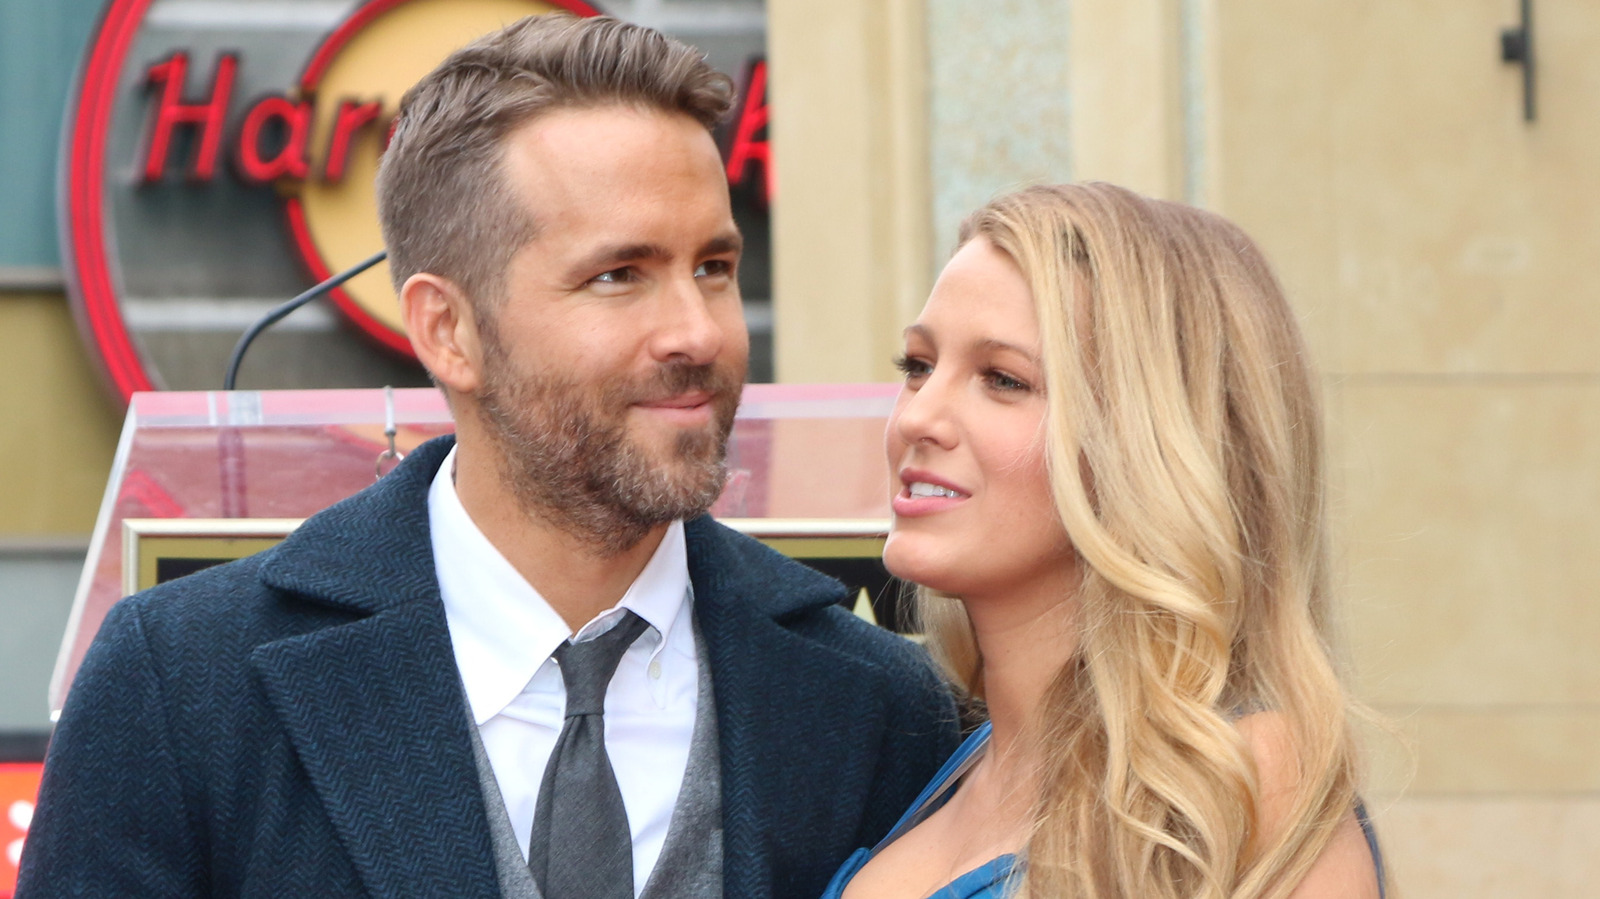 Blake Lively And Ryan Reynolds Decided To Move In Together After Only A Week Of Dating 